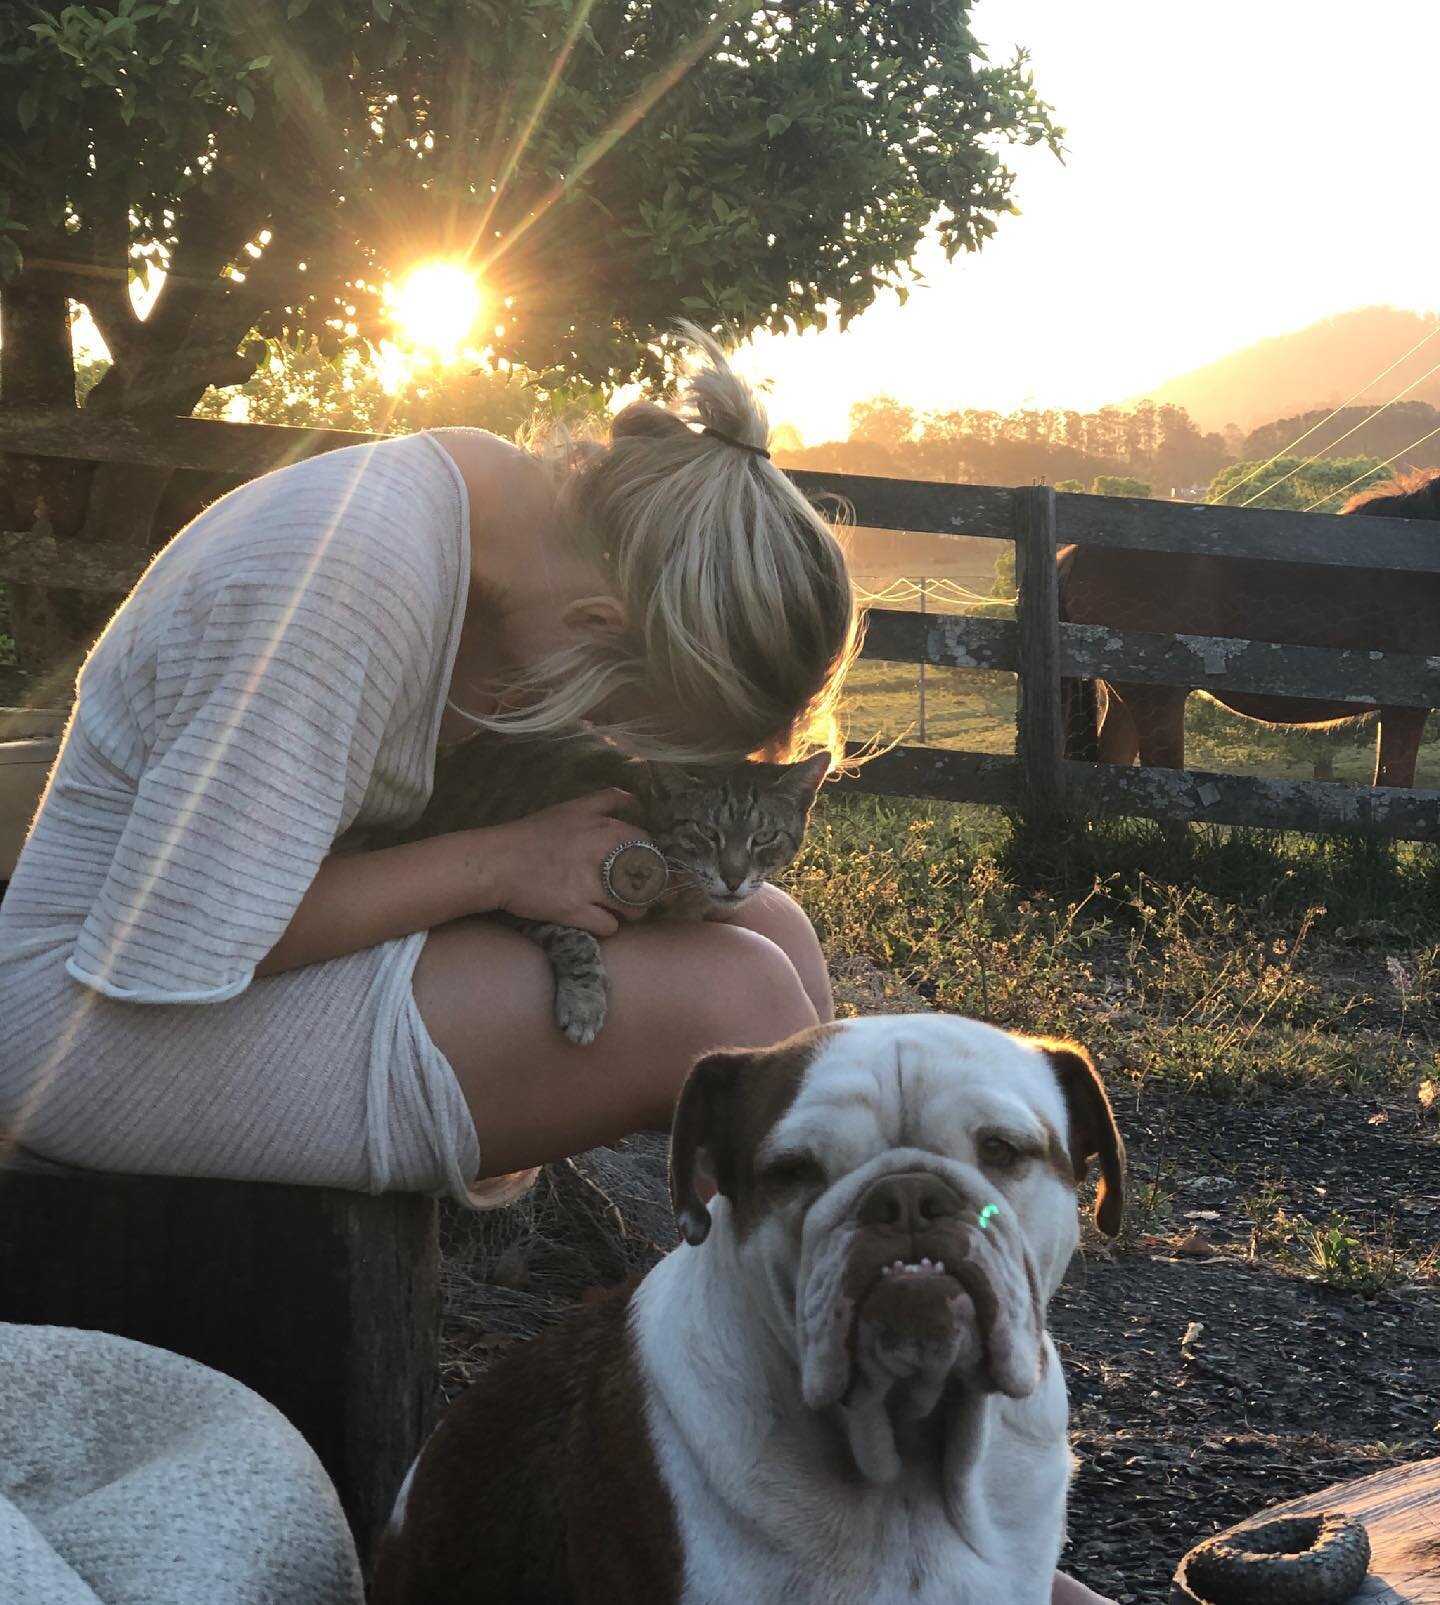 A scene from our farm with @venus.russo, Weirdo and Oddball 💕🌺

We wouldn&rsquo;t be the amazing farm we are without our therapy dog Oddball and therapy cat Weirdo! 🐈🐶

Weirdy really really helps visitors de-stress, especially neurotypical childr